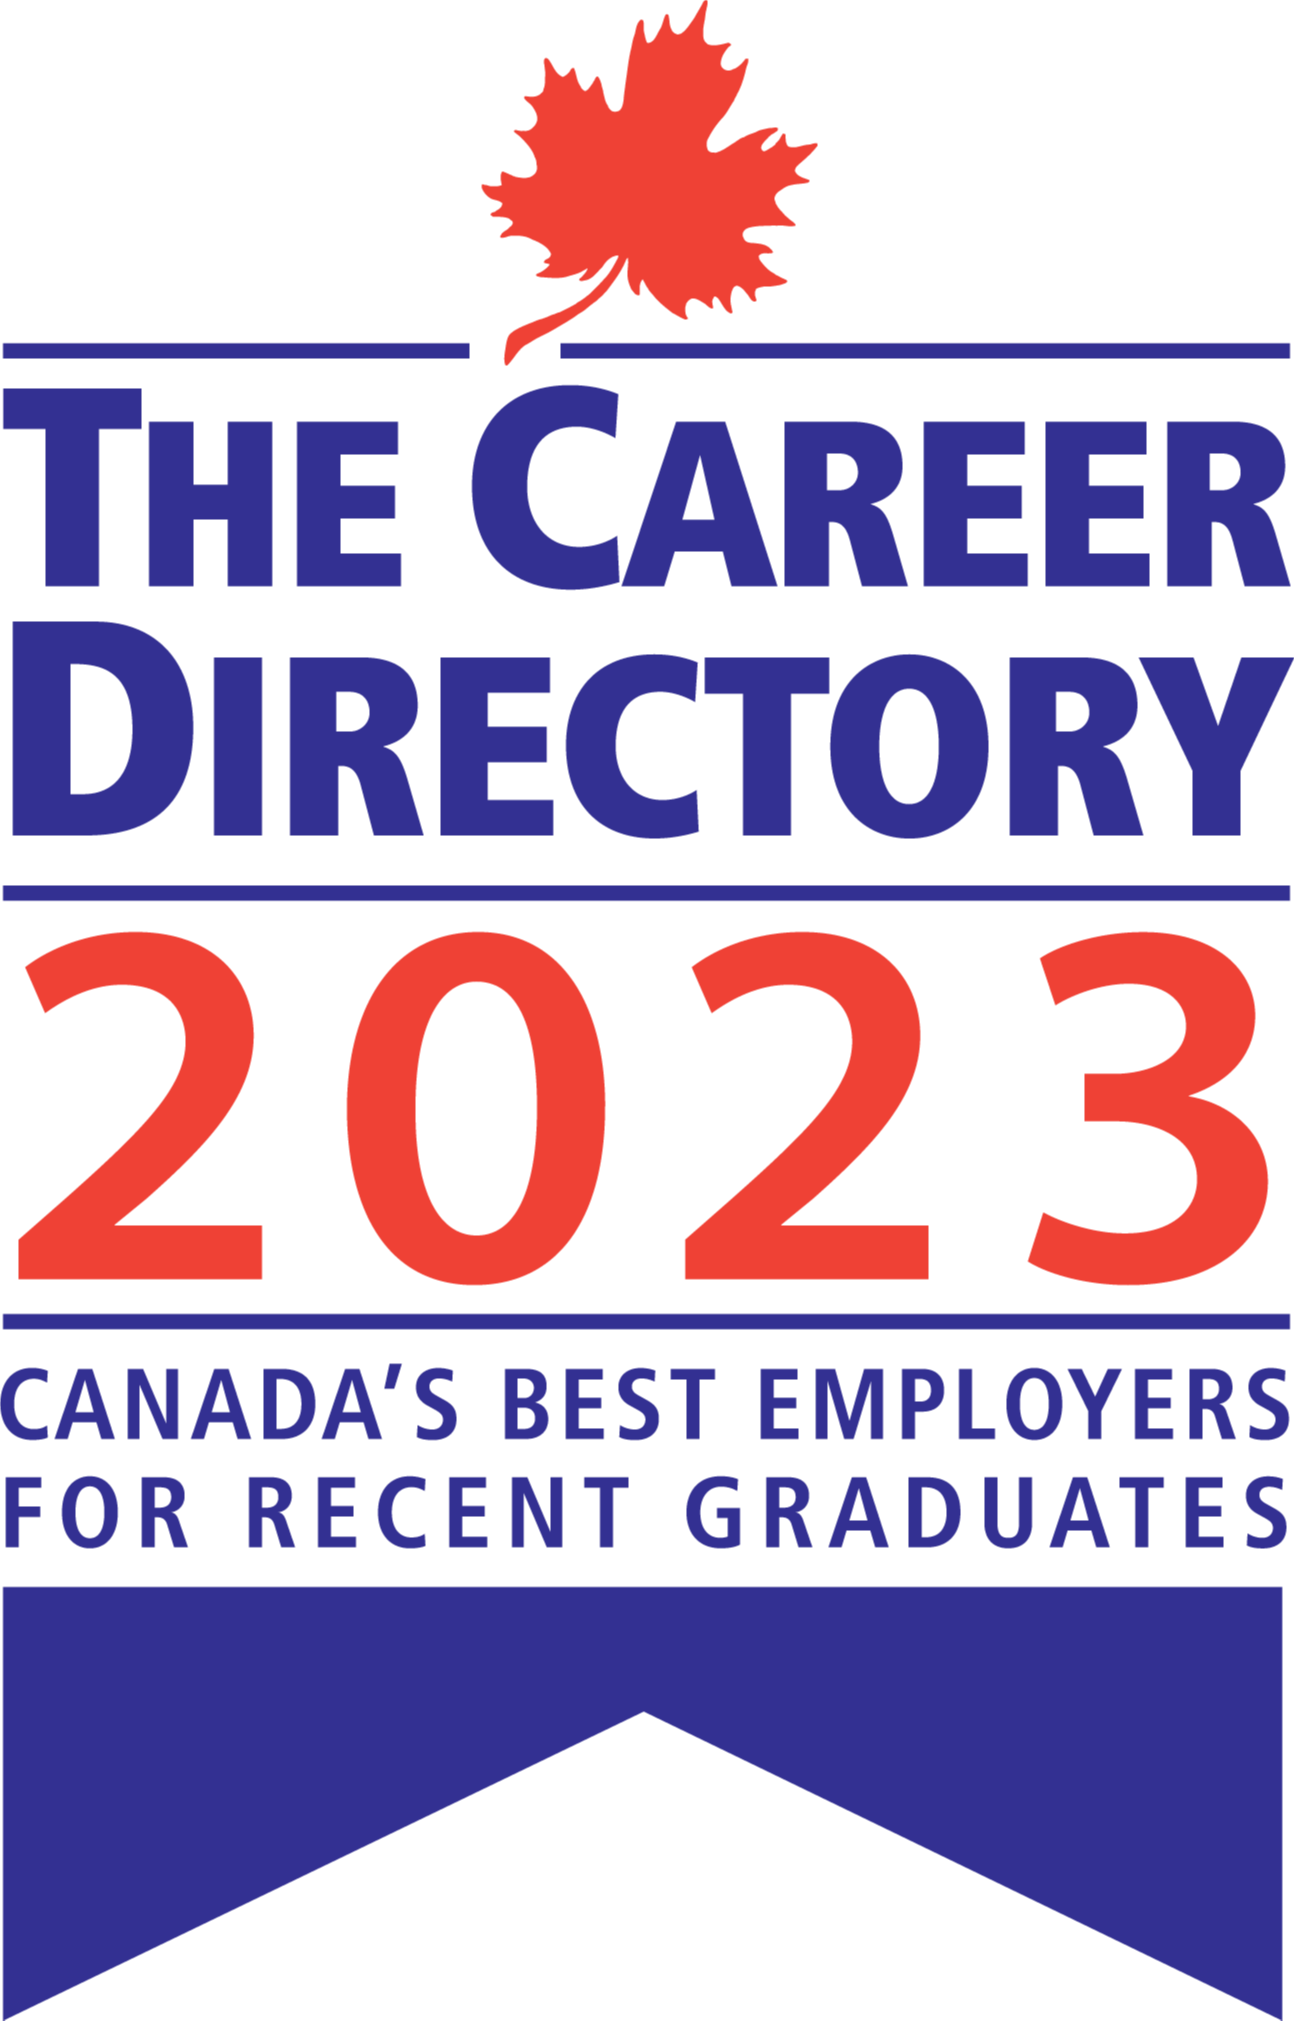 Canada's Best Employers for Recent Graduates